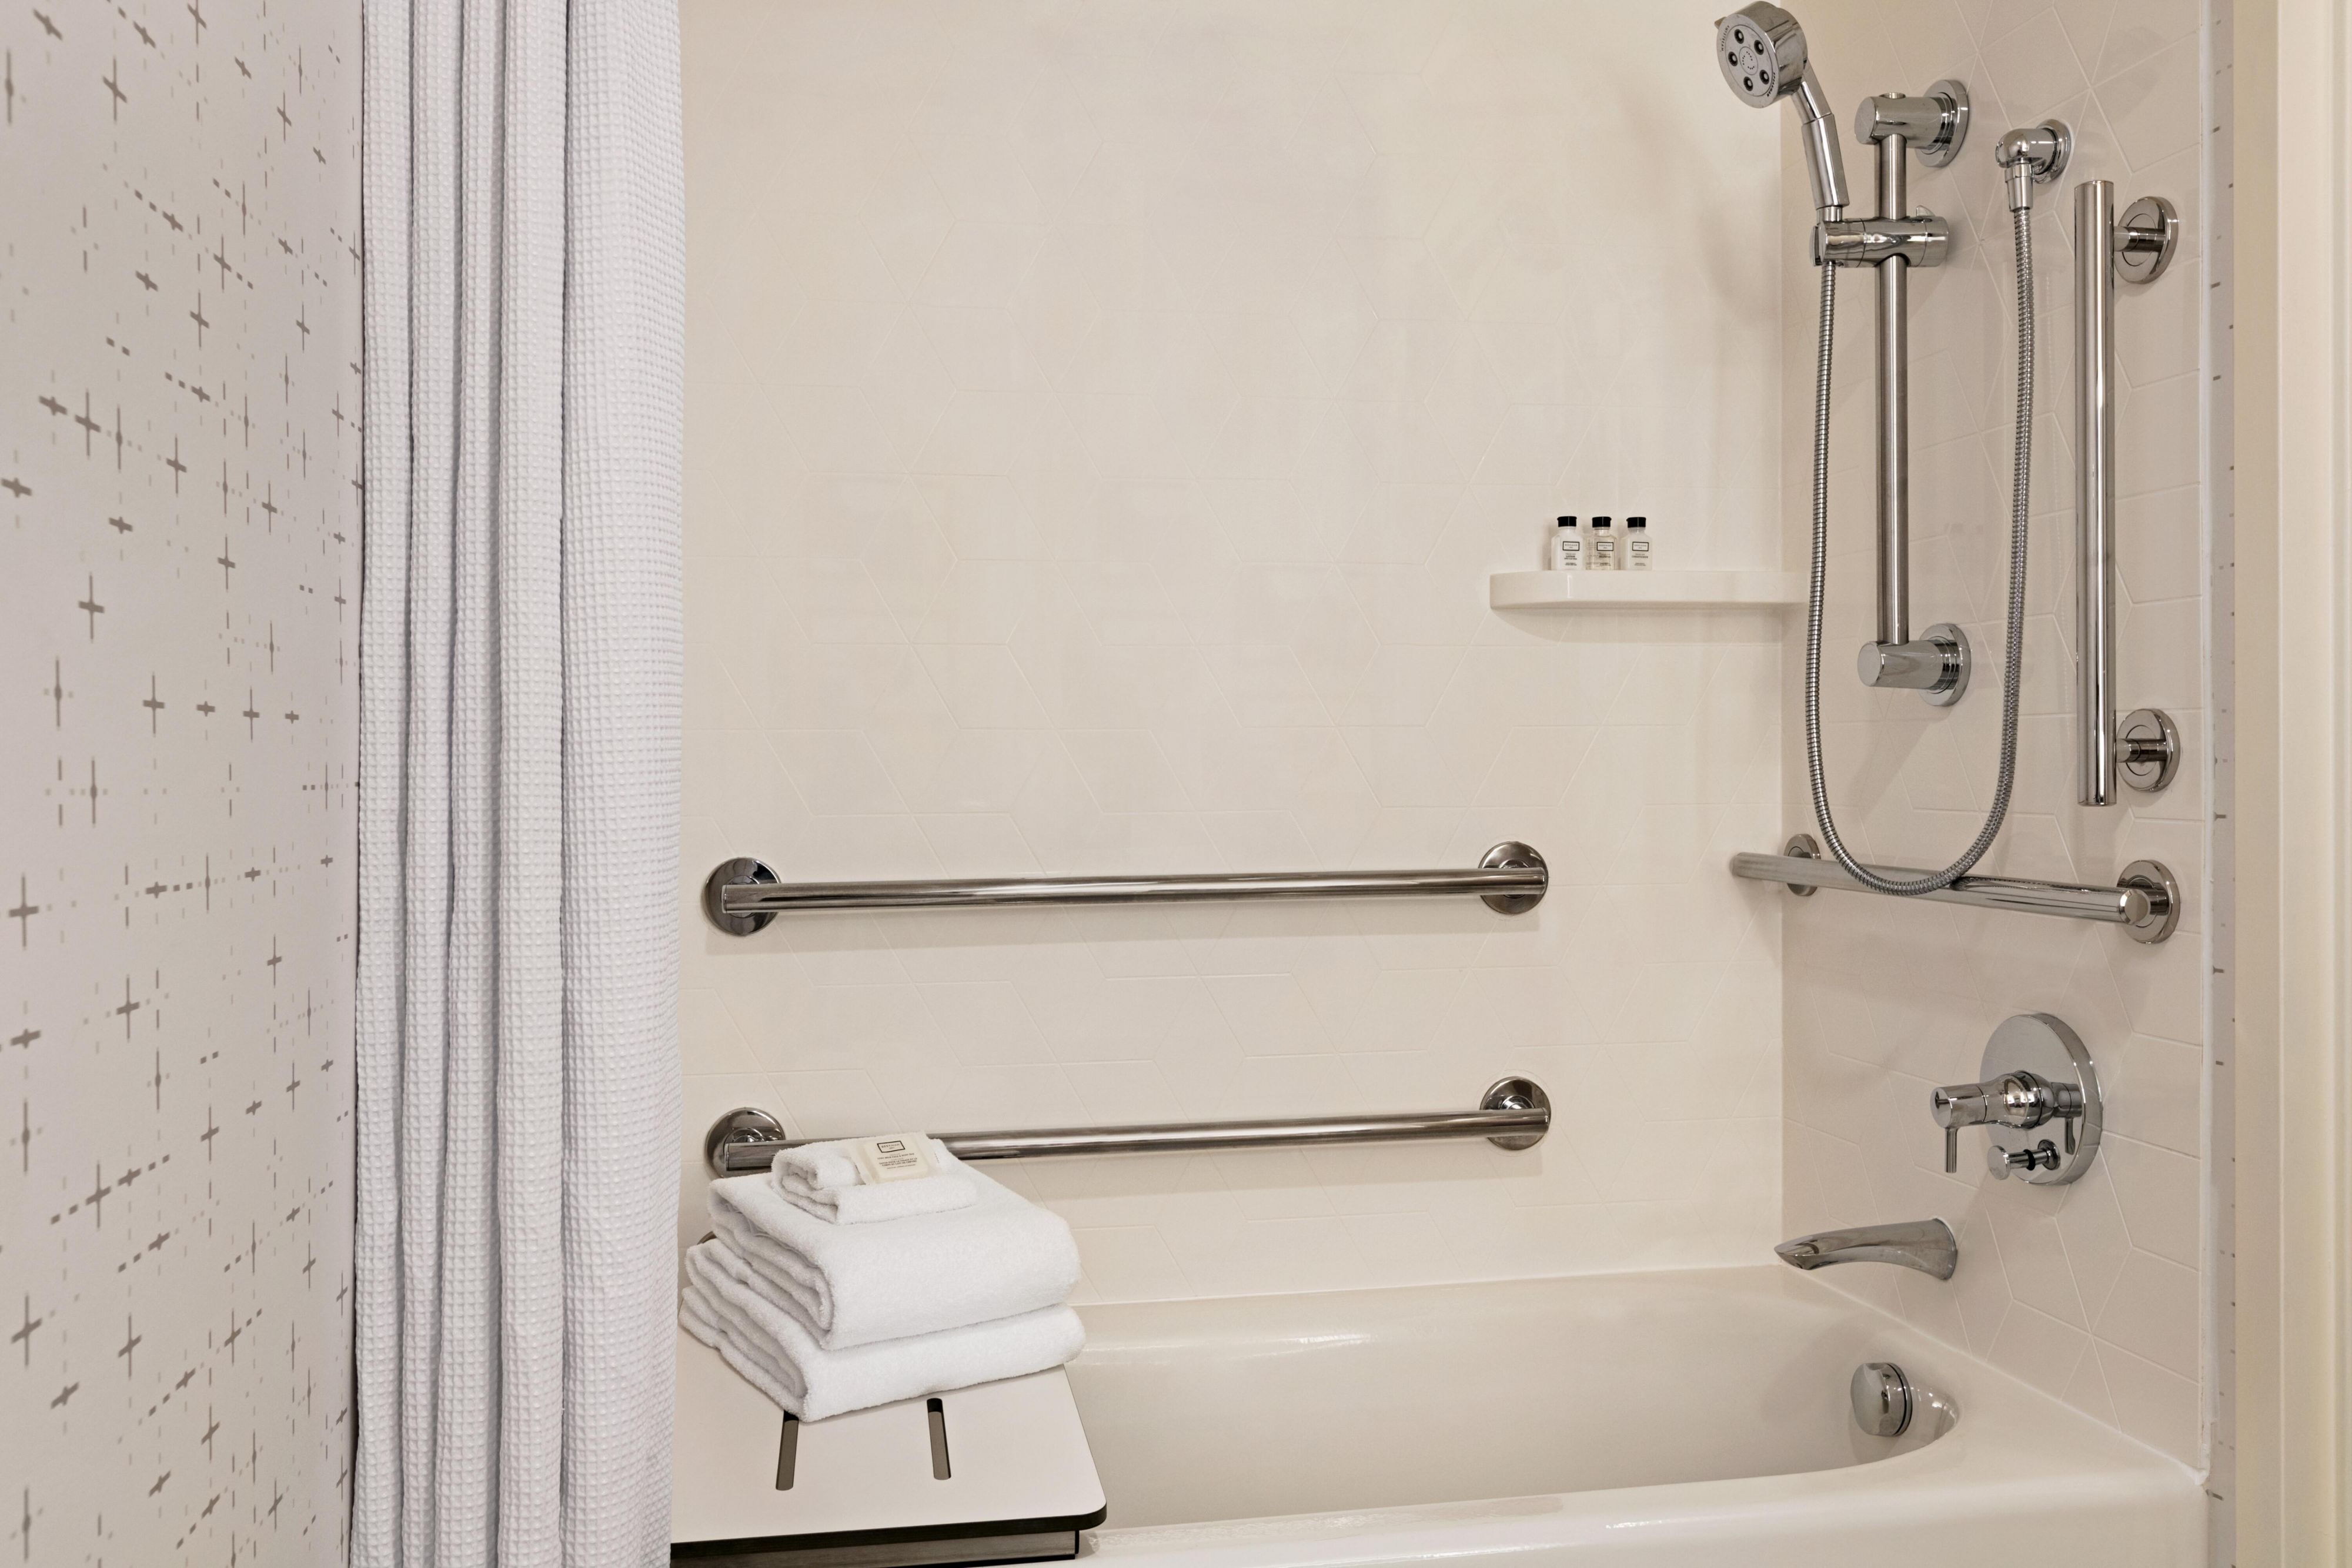 Our hotel offers mobility accessible bathrooms with tub.